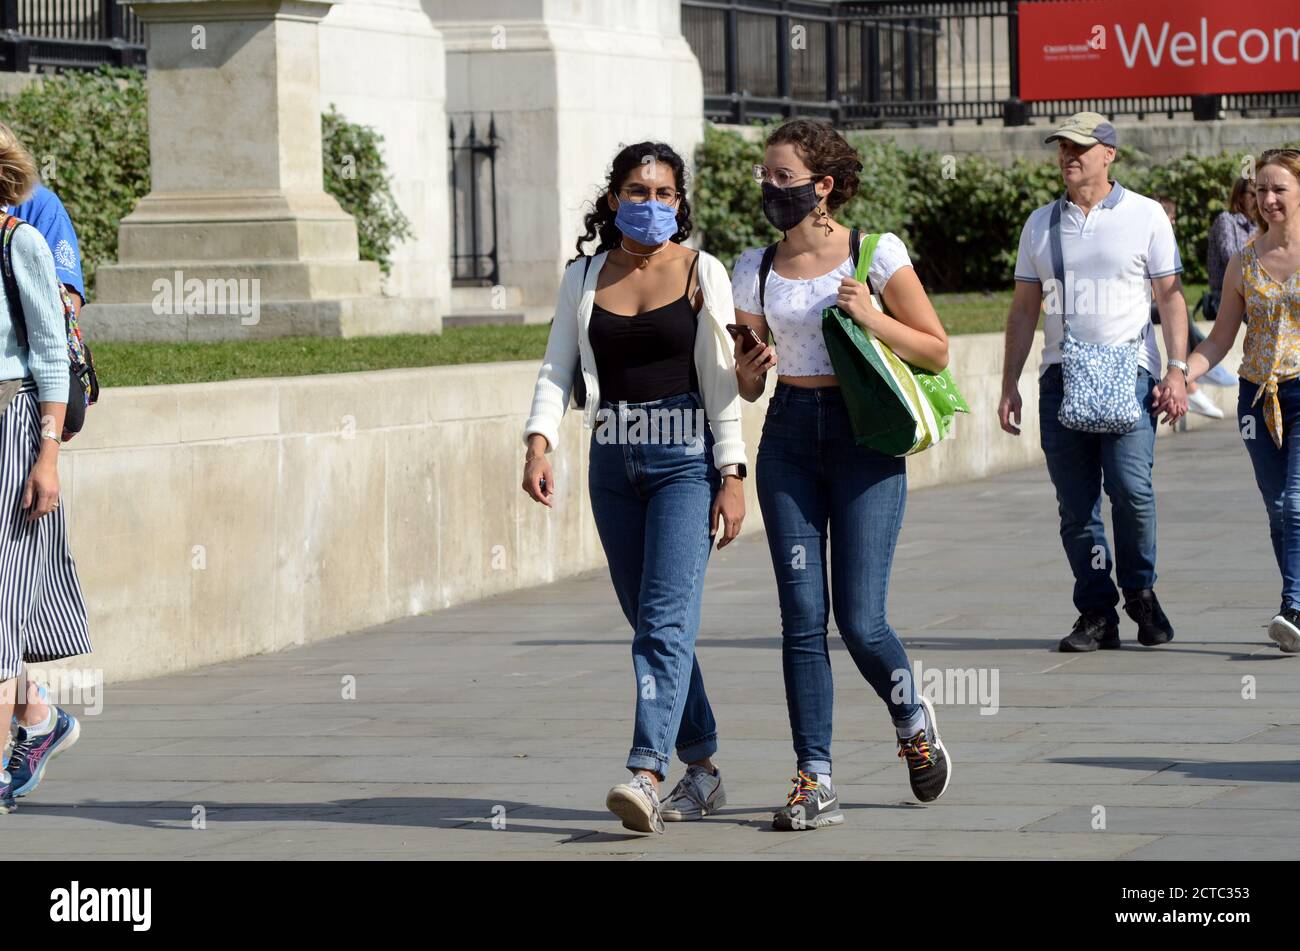 London, UK. 22nd Sep, 2020. West End of London busy in the sunshine before wet weather arrives and coronavirus restrictions introduced. Credit: JOHNNY ARMSTEAD/Alamy Live News Stock Photo